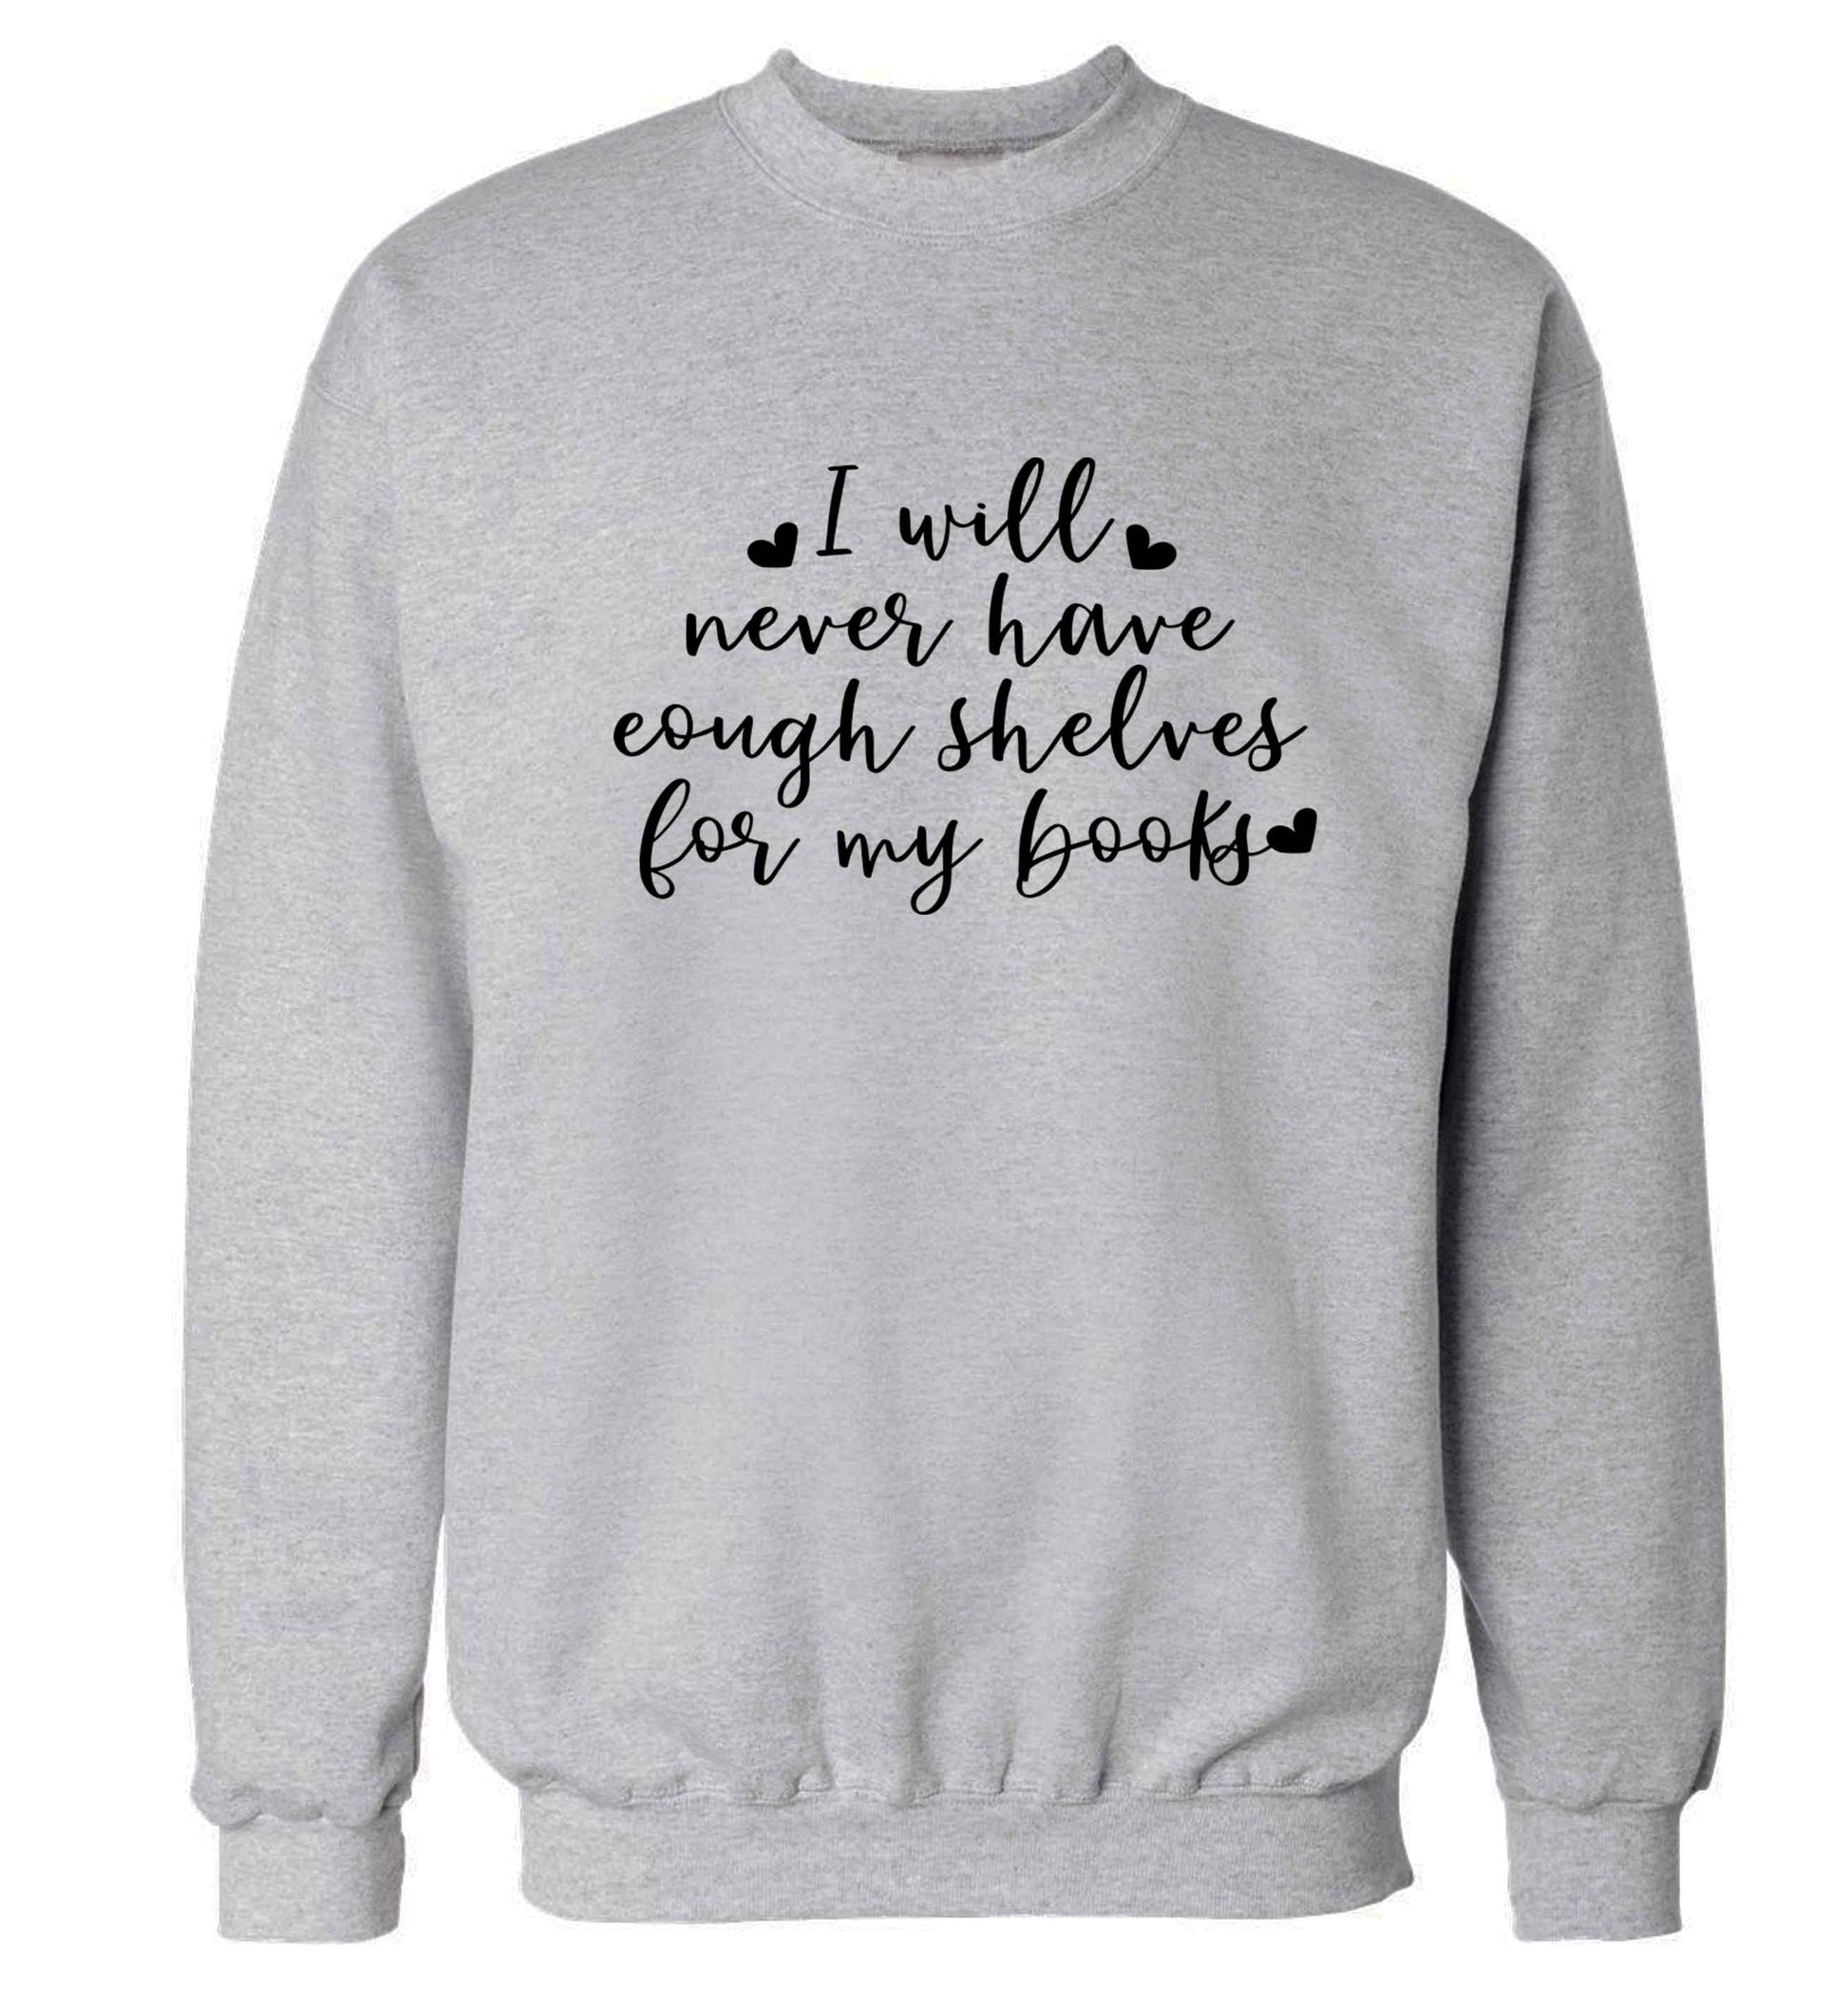 I will never have enough shelves for my books Adult's unisex grey Sweater 2XL